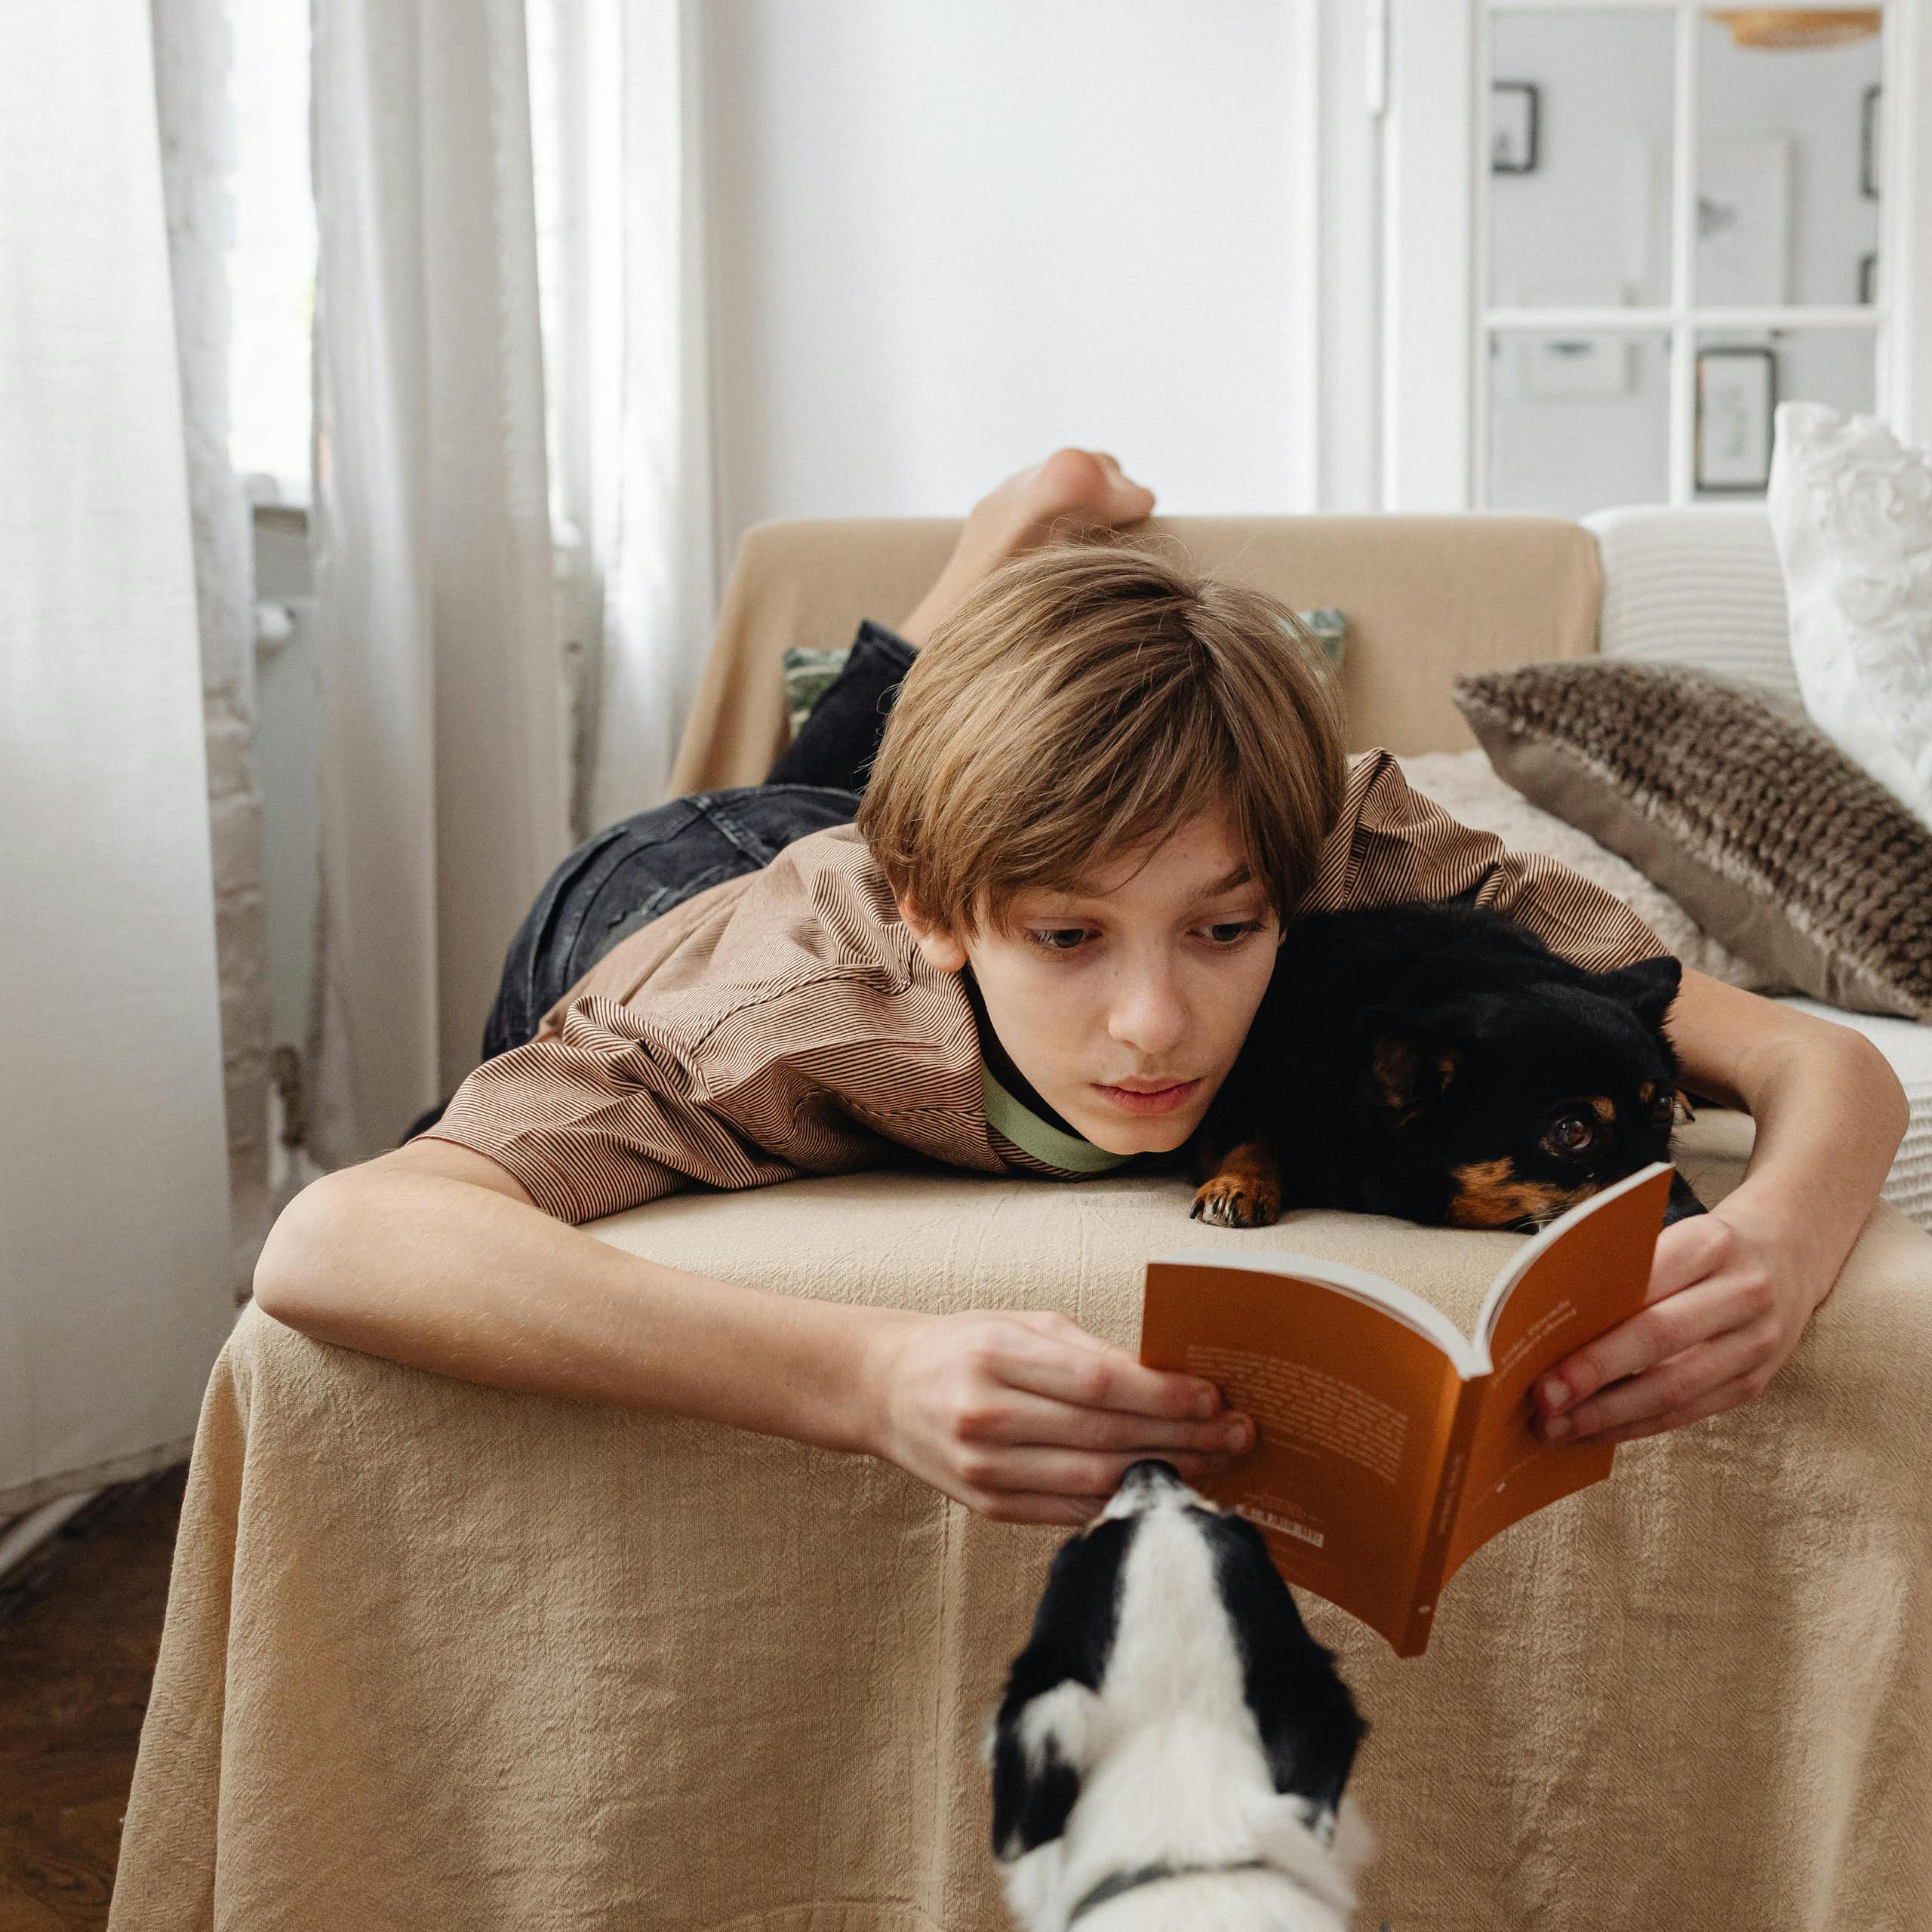 A teenage boy lies on a couch with a dog, reading a book.